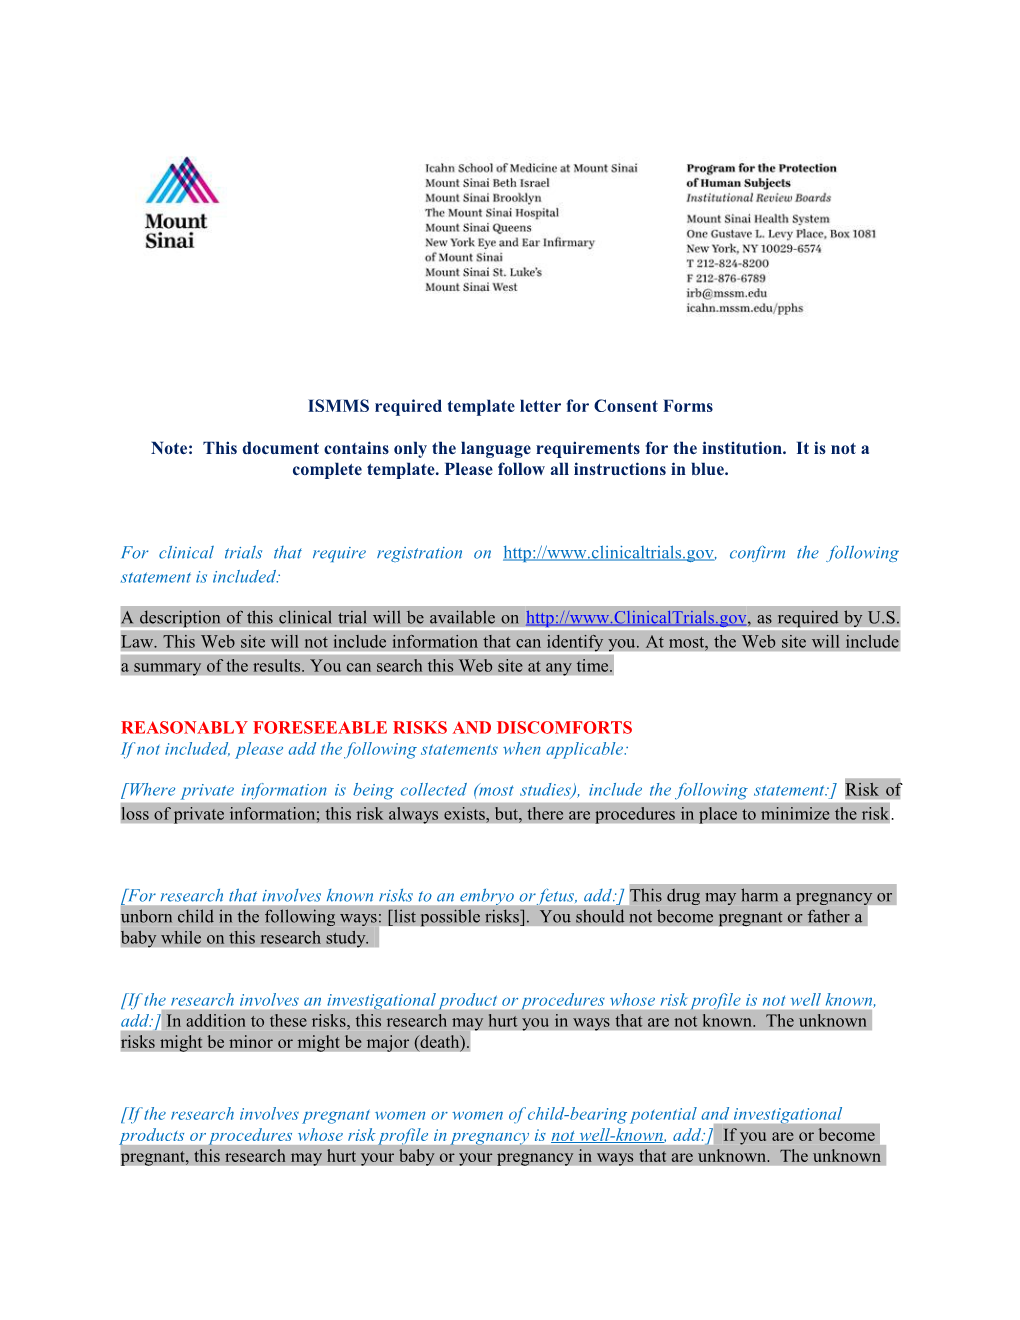 ISMMS Required Template Letter for Consent Forms